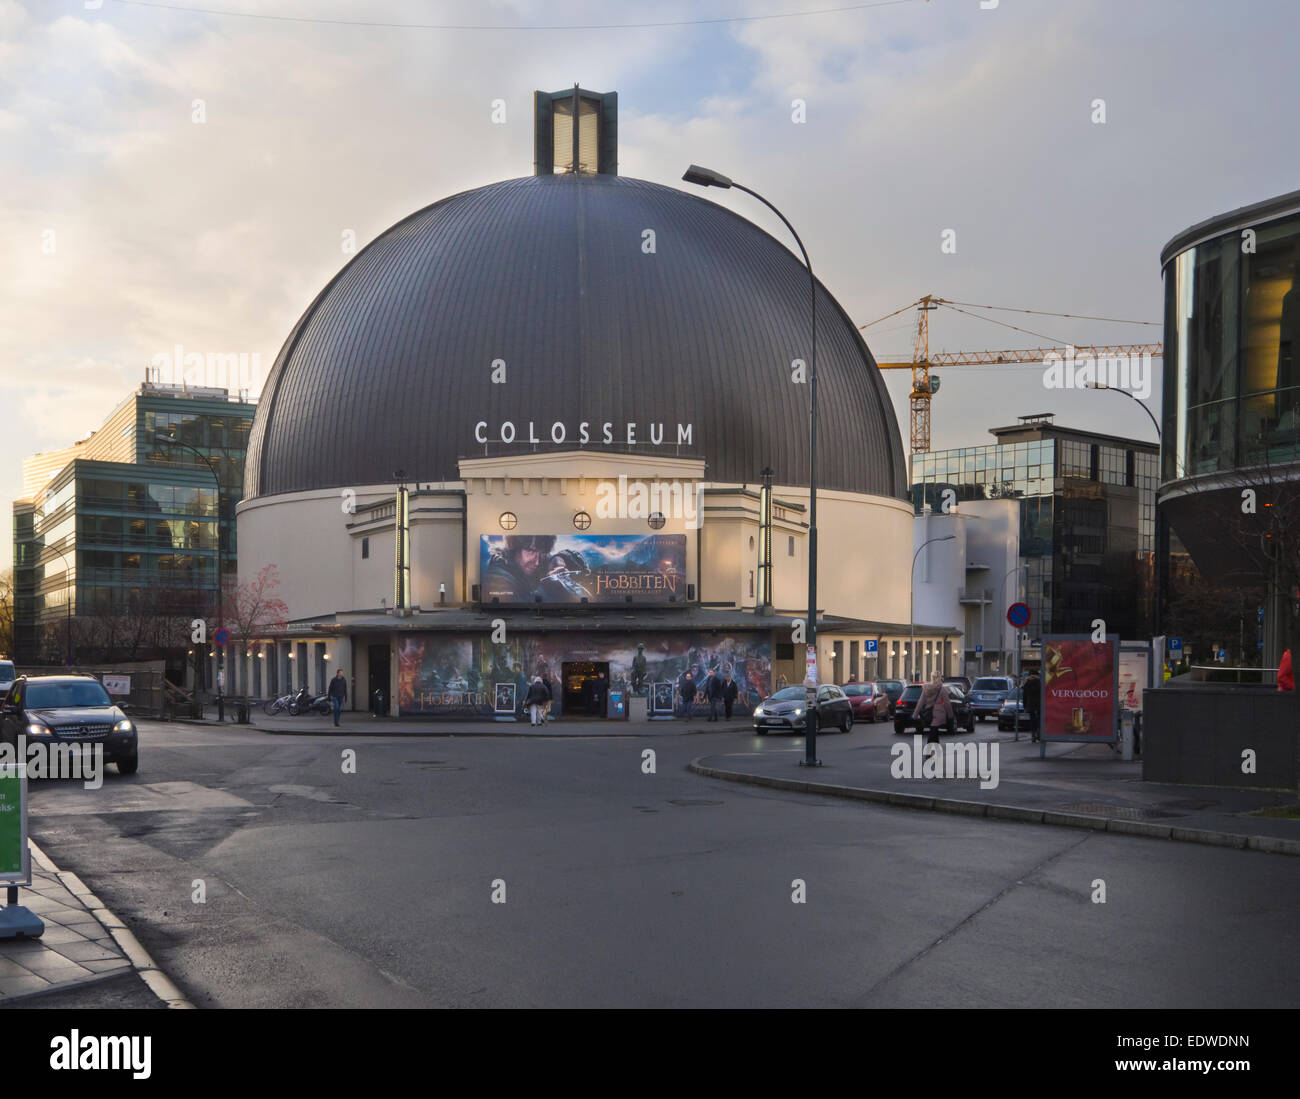 Colosseum kino, domed cinema in Majorstua Oslo Norway, exterior view, entrance with advertisement for the Hobbit film Stock Photo